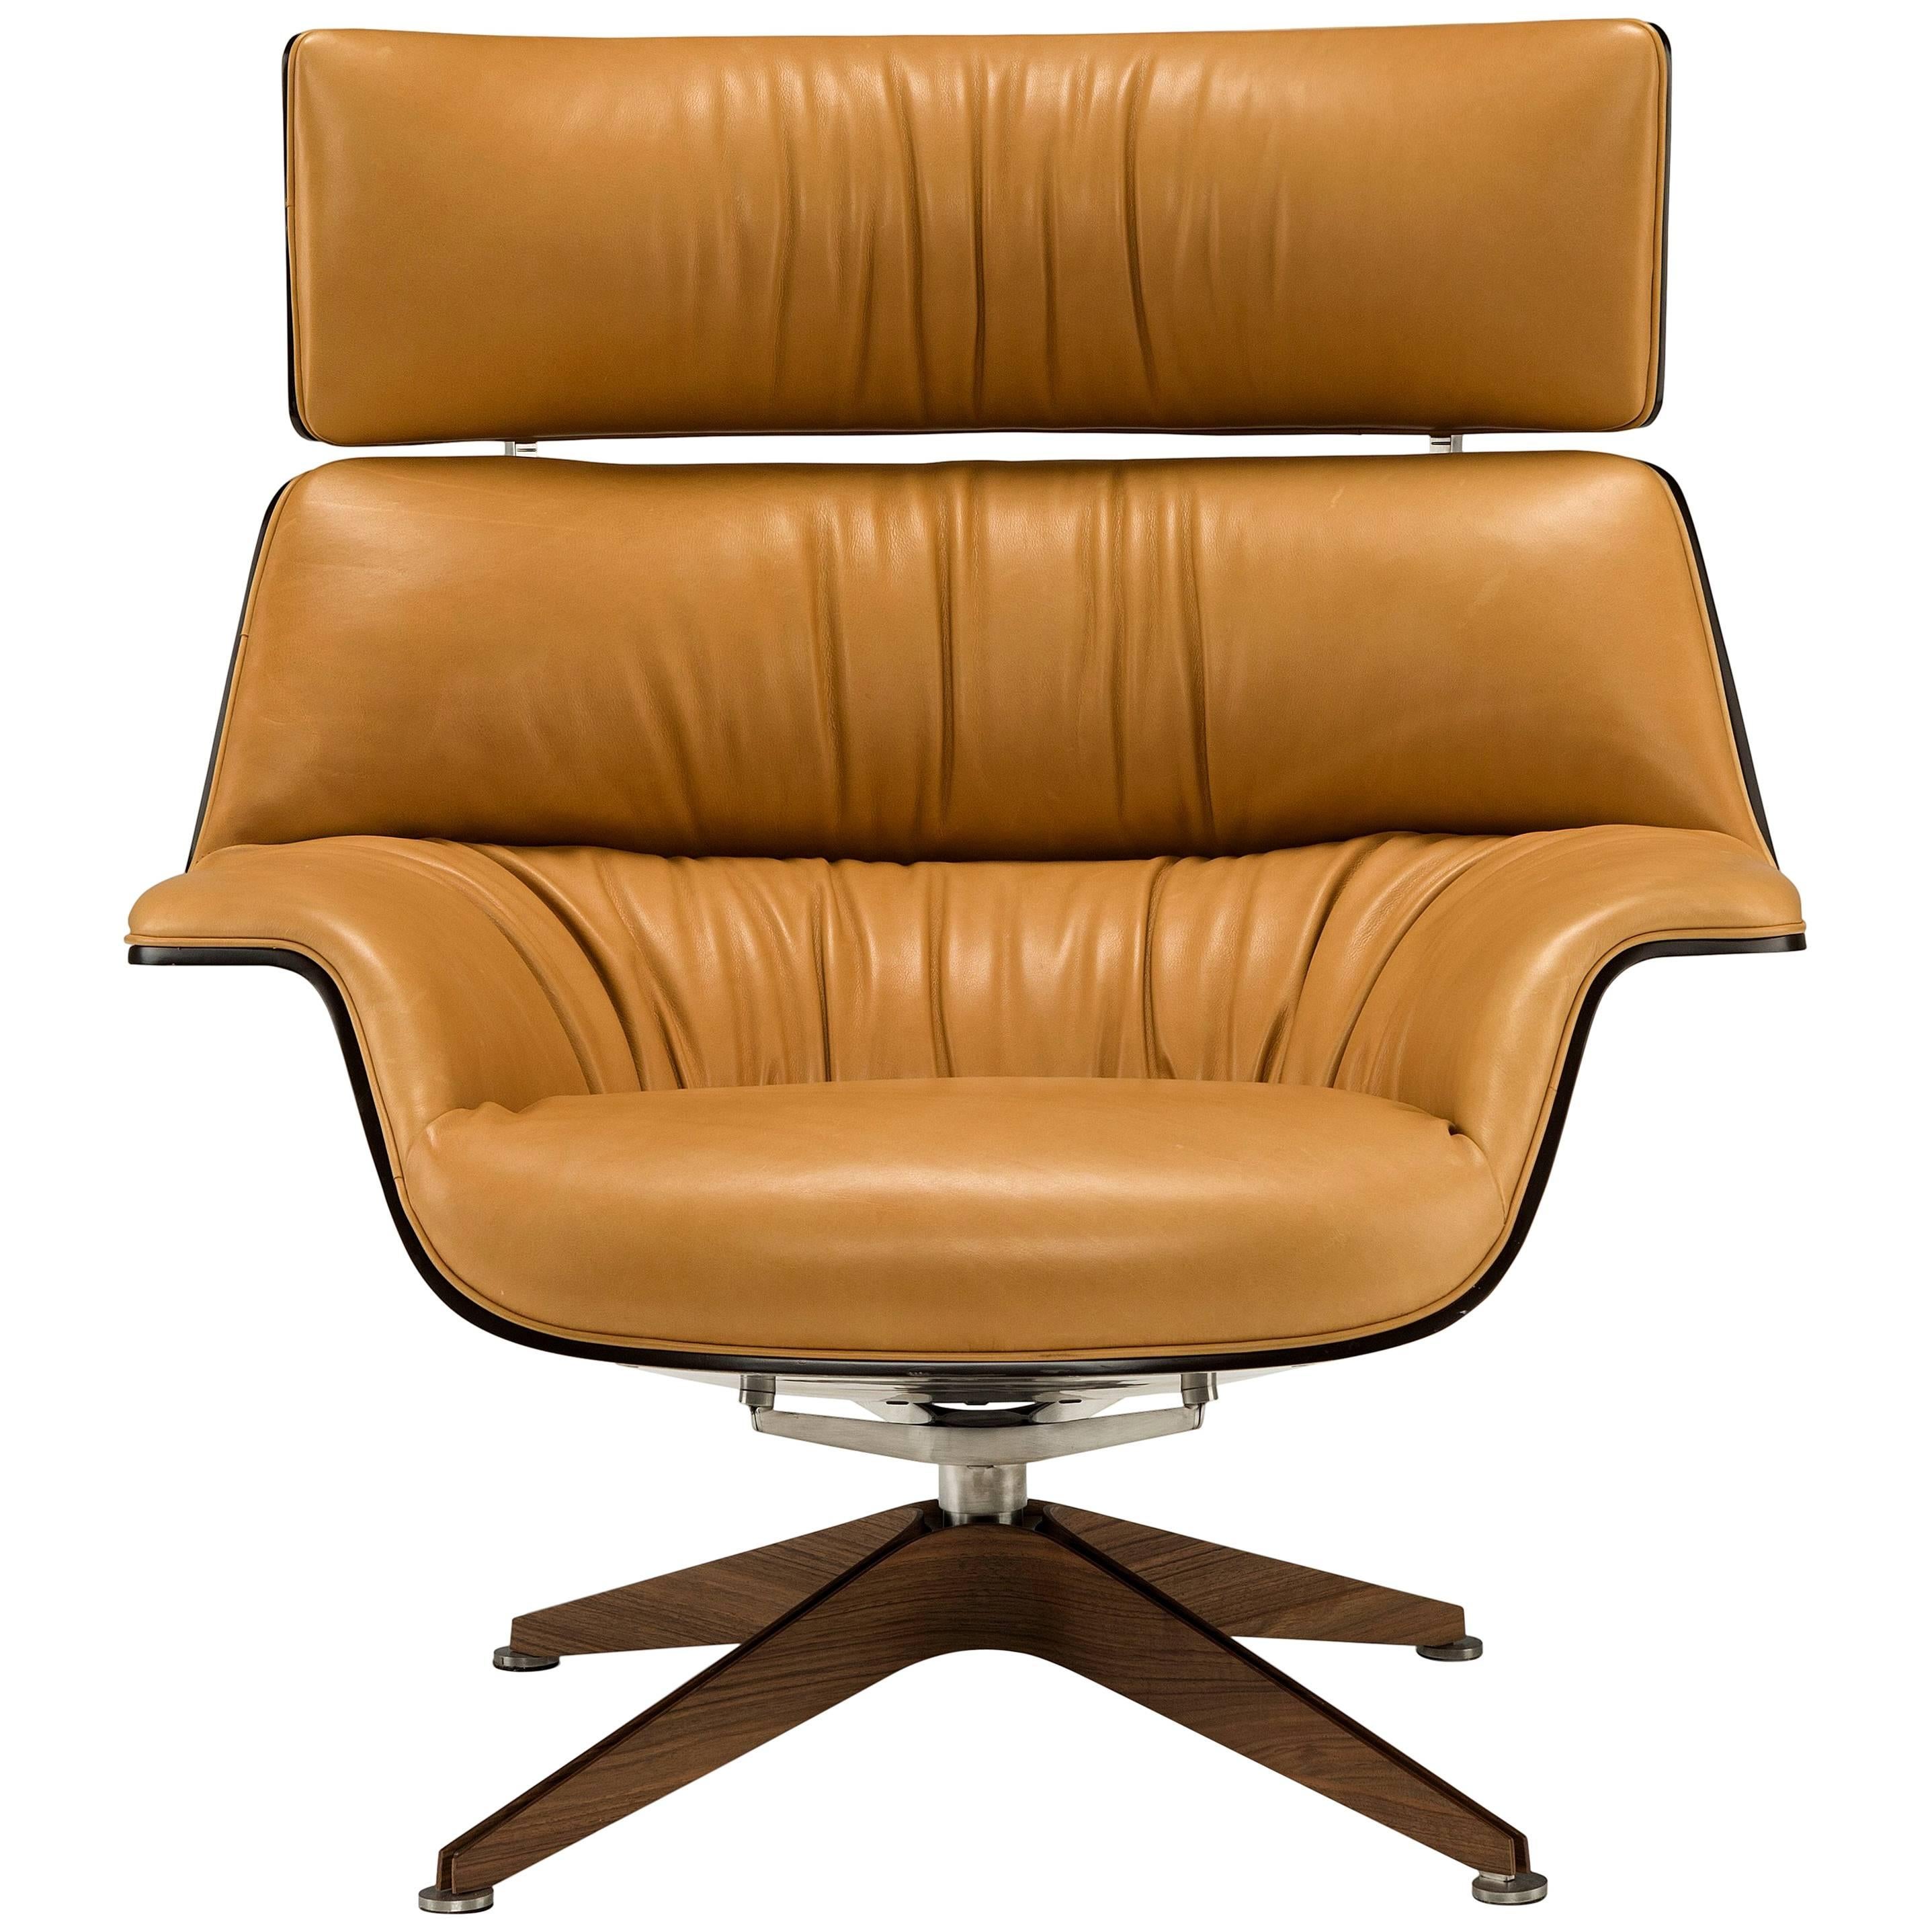 Saint Luc 'Coach' Lounge Chair with Headrest in Ochre by J.M. Massaud For Sale